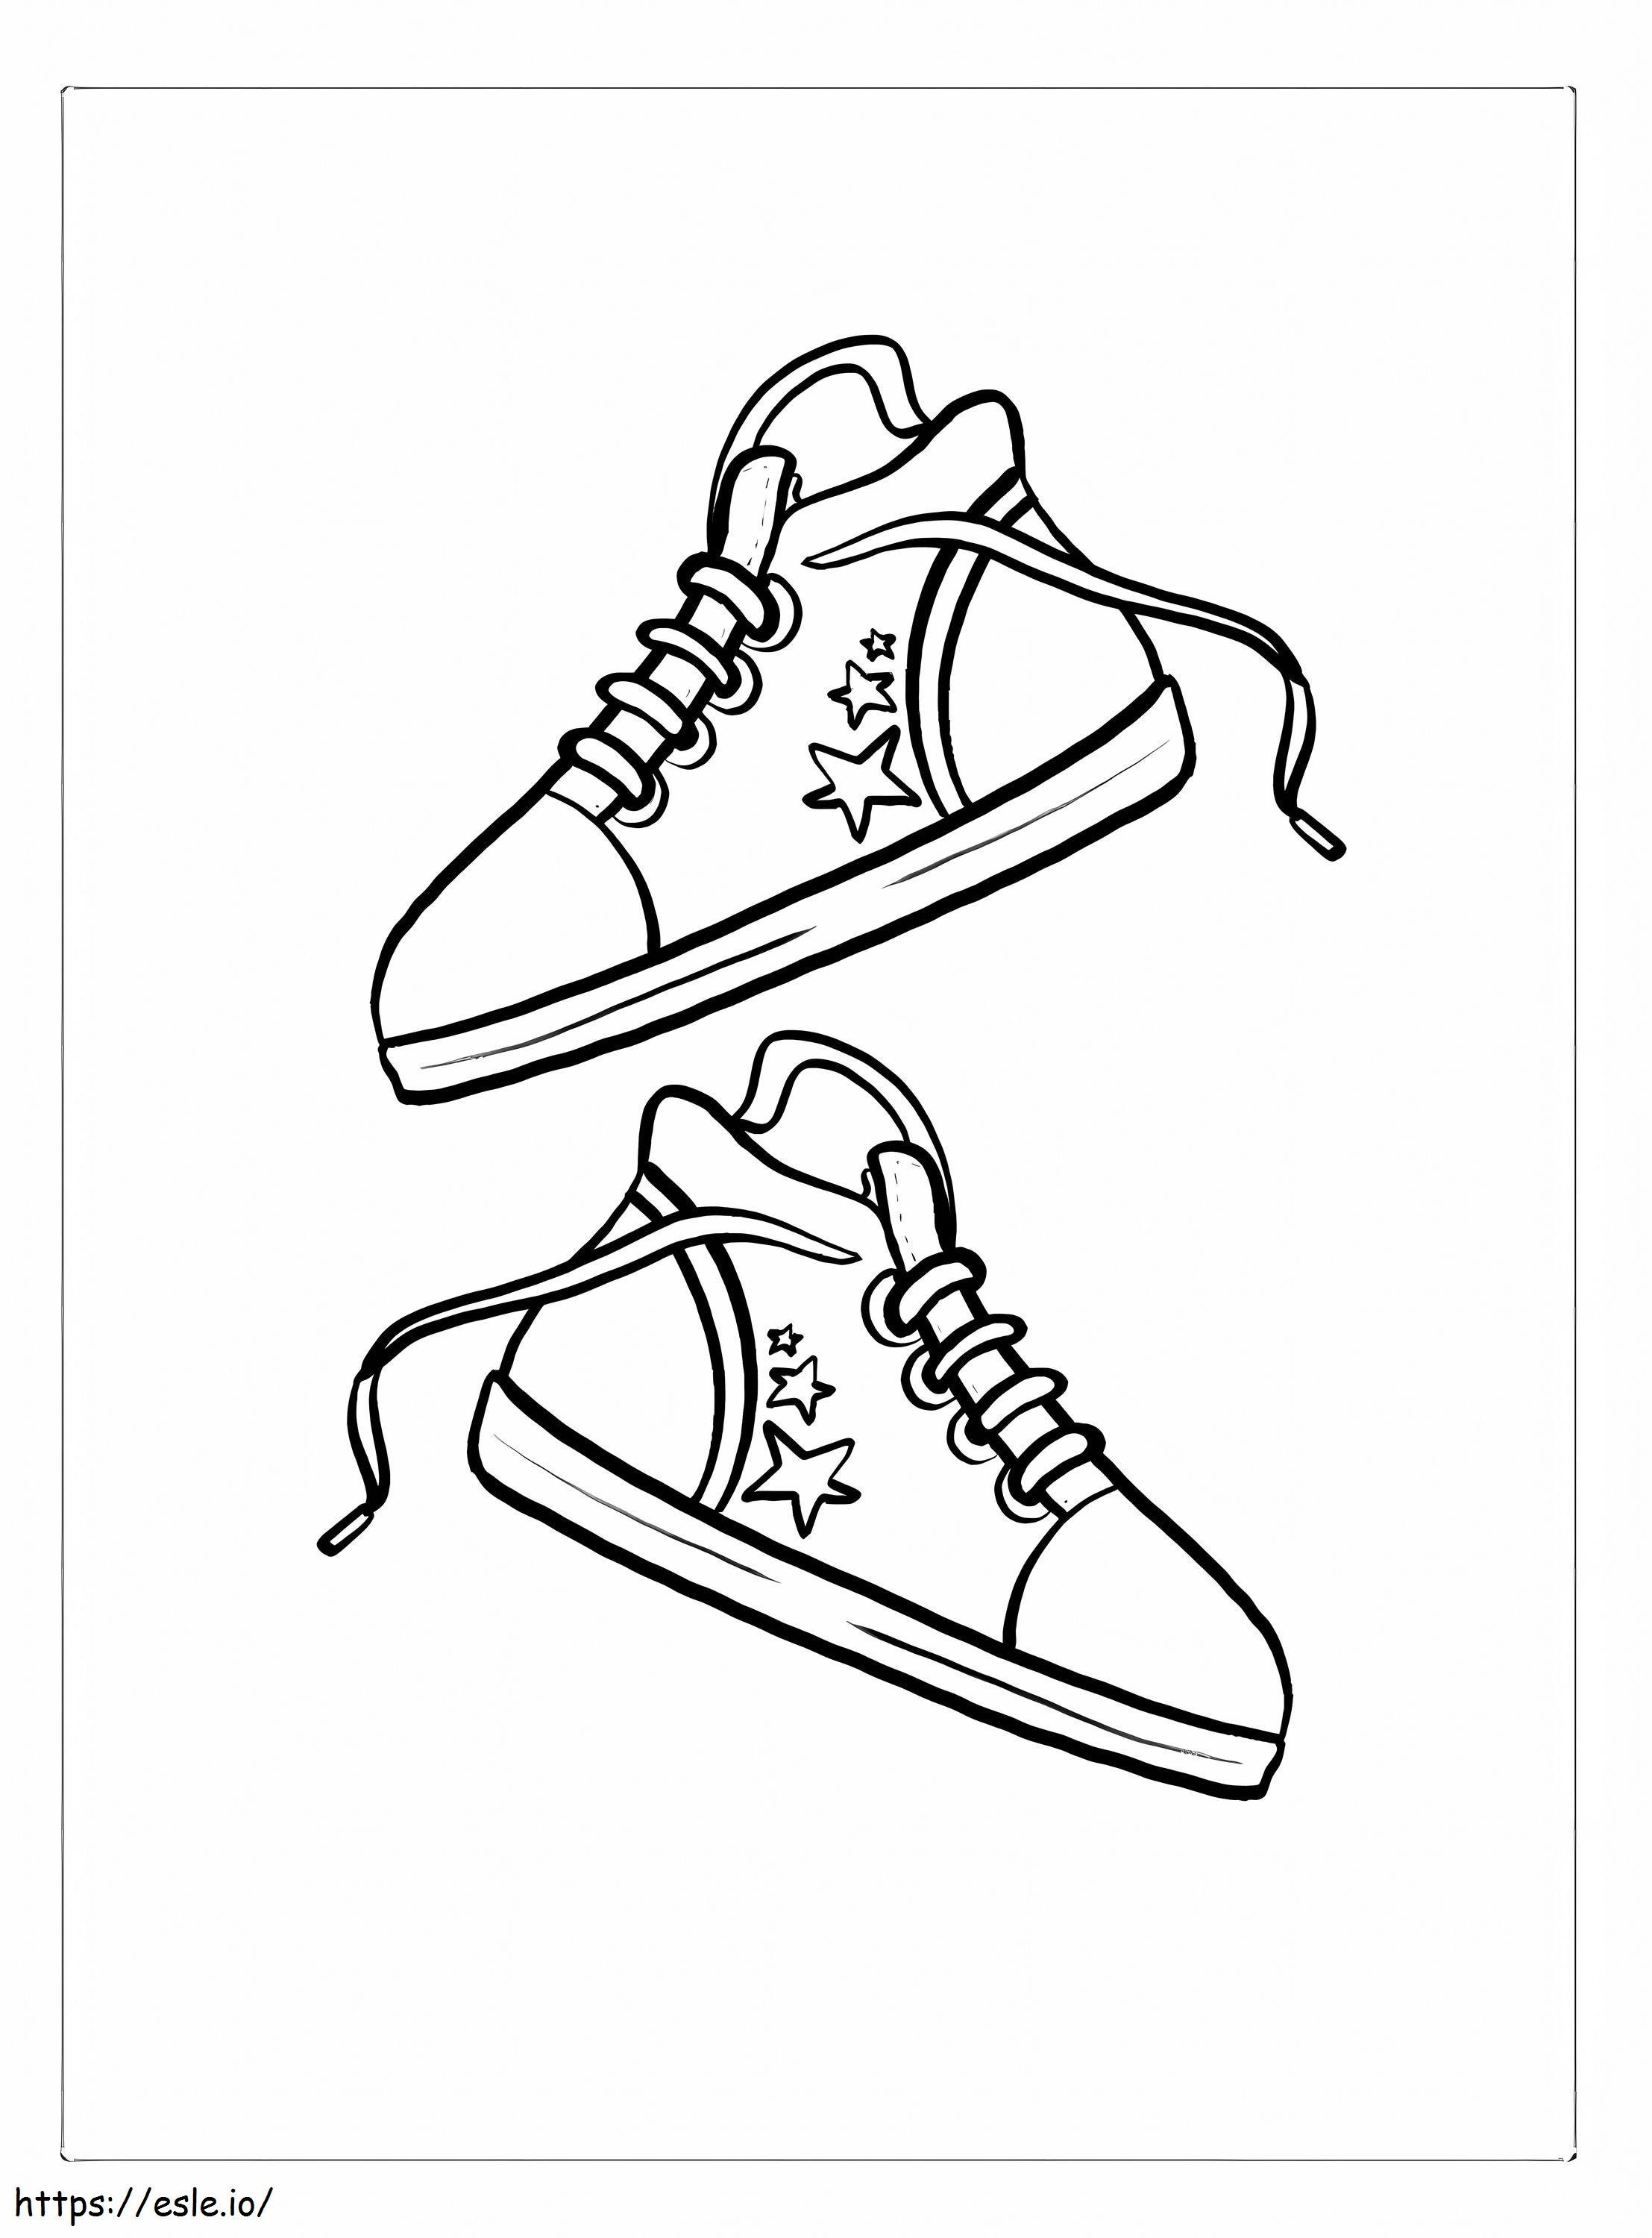 Big Shoes coloring page